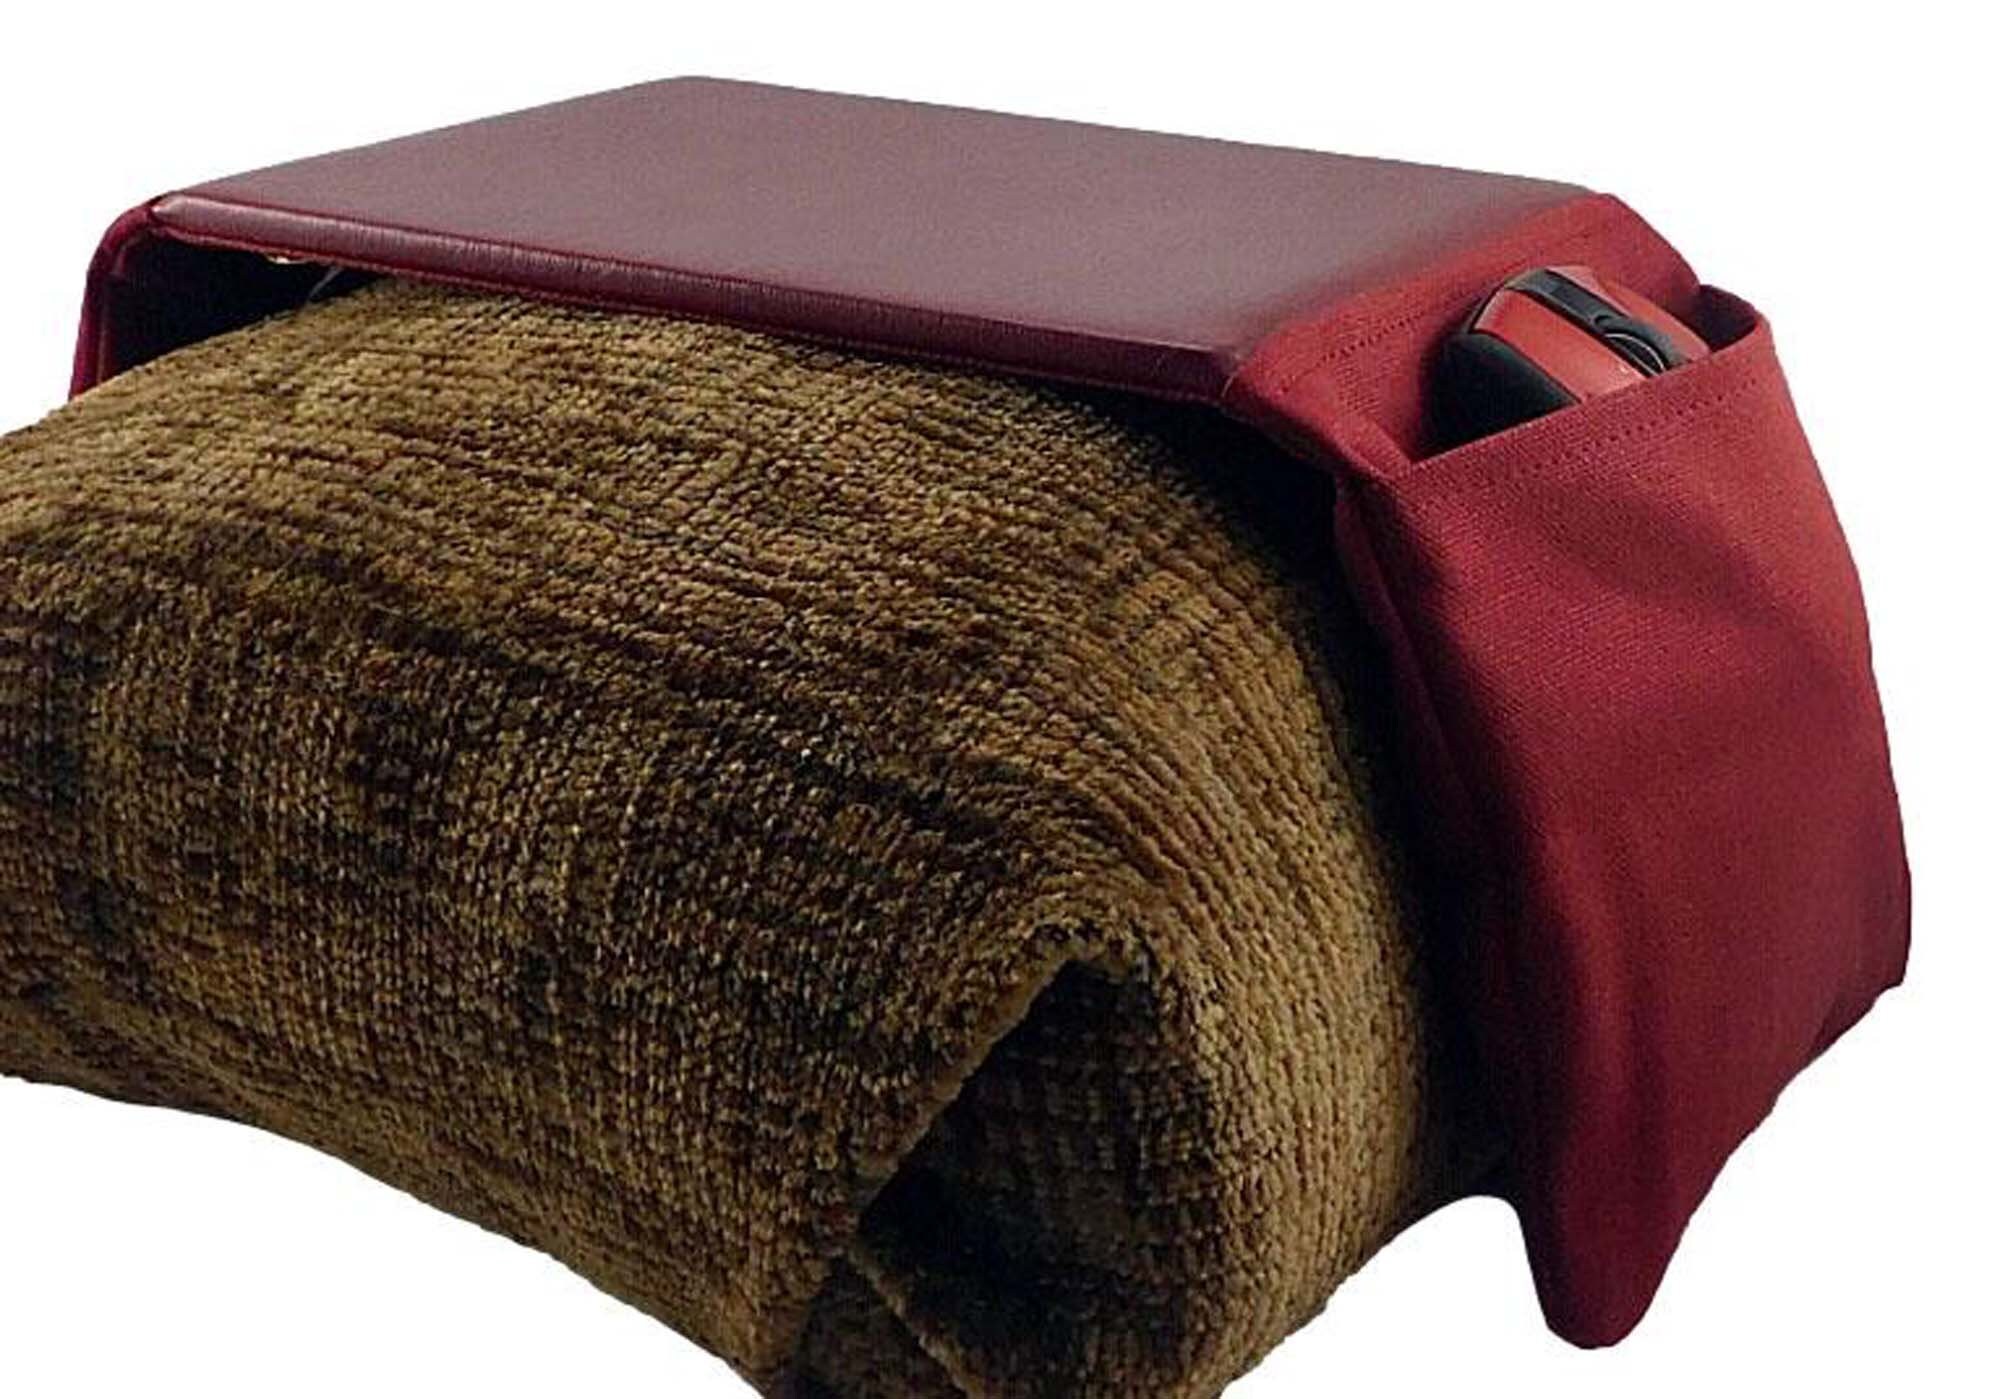 Arm Chair / Arm Rest Bean Bag Mouse Pad With Mouse Storage - Etsy UK